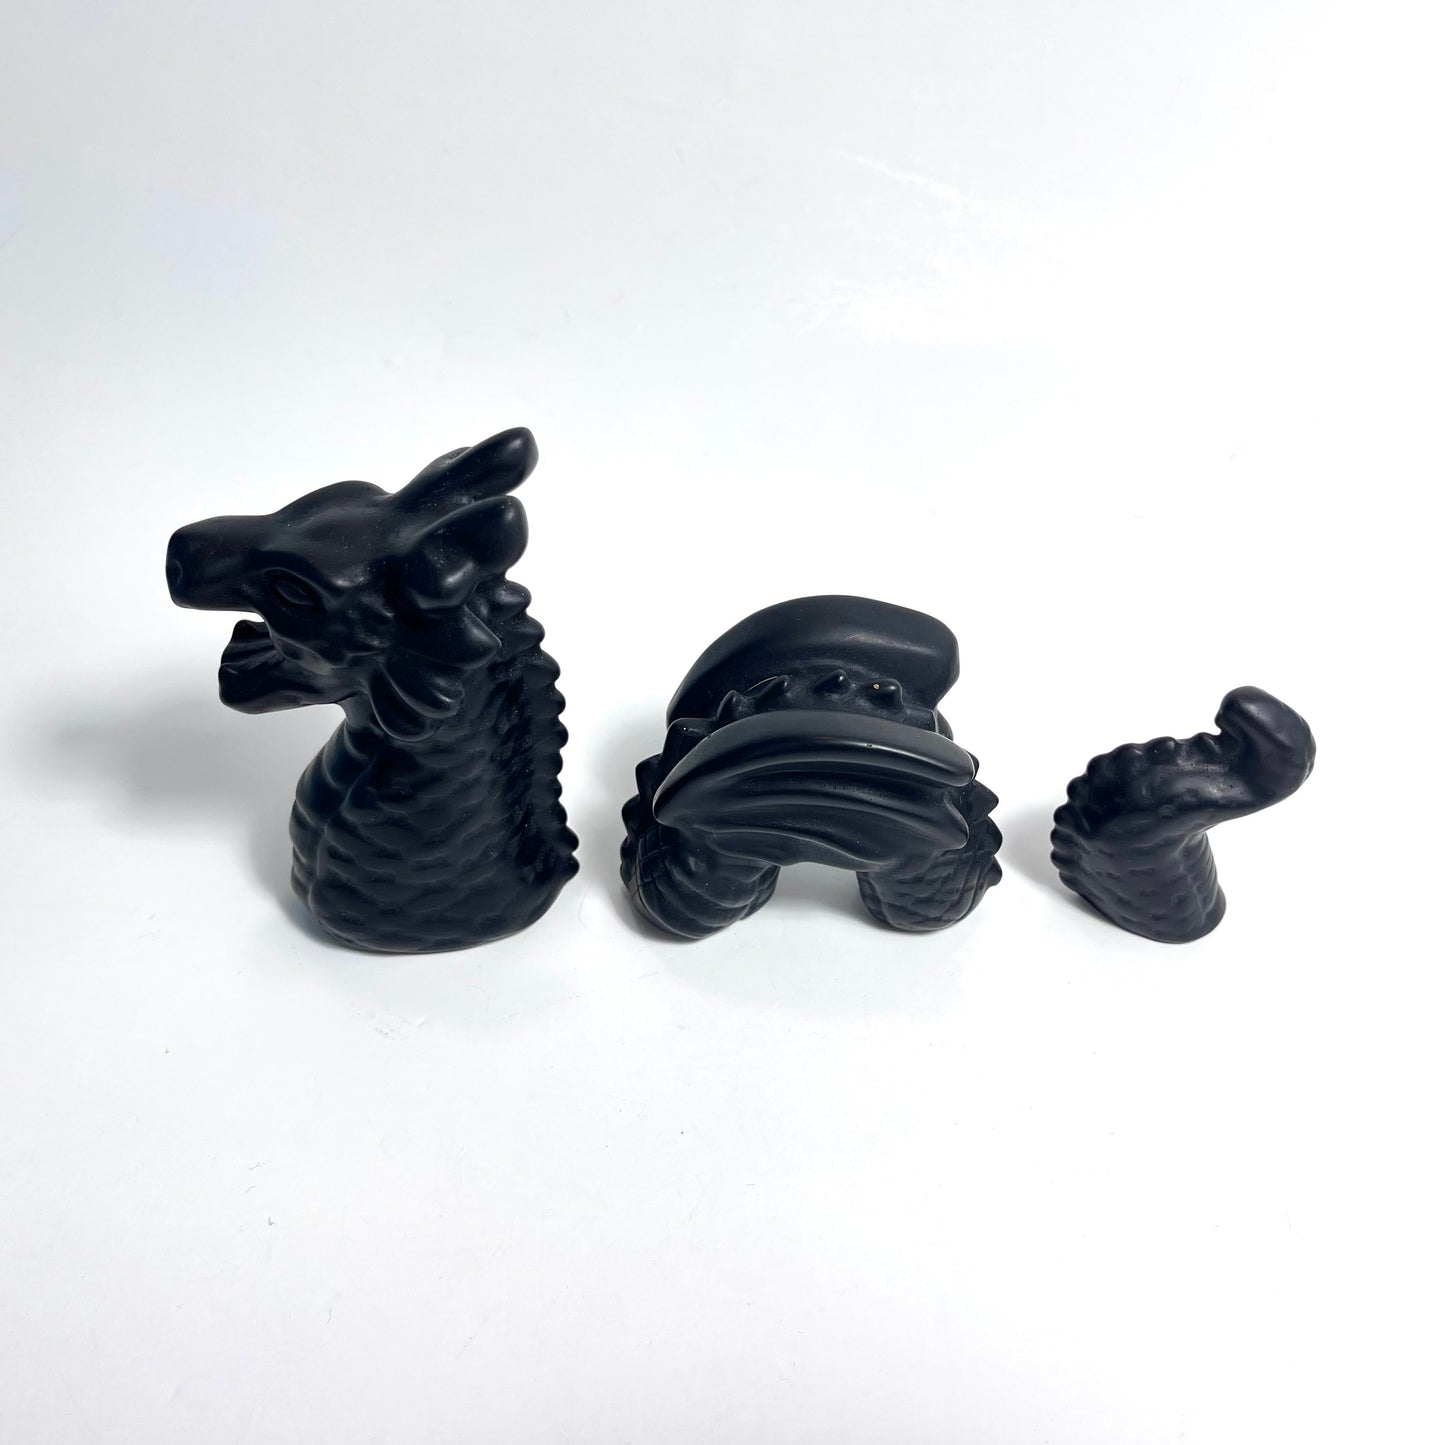 Obsidian | Dragon 3 piece carving